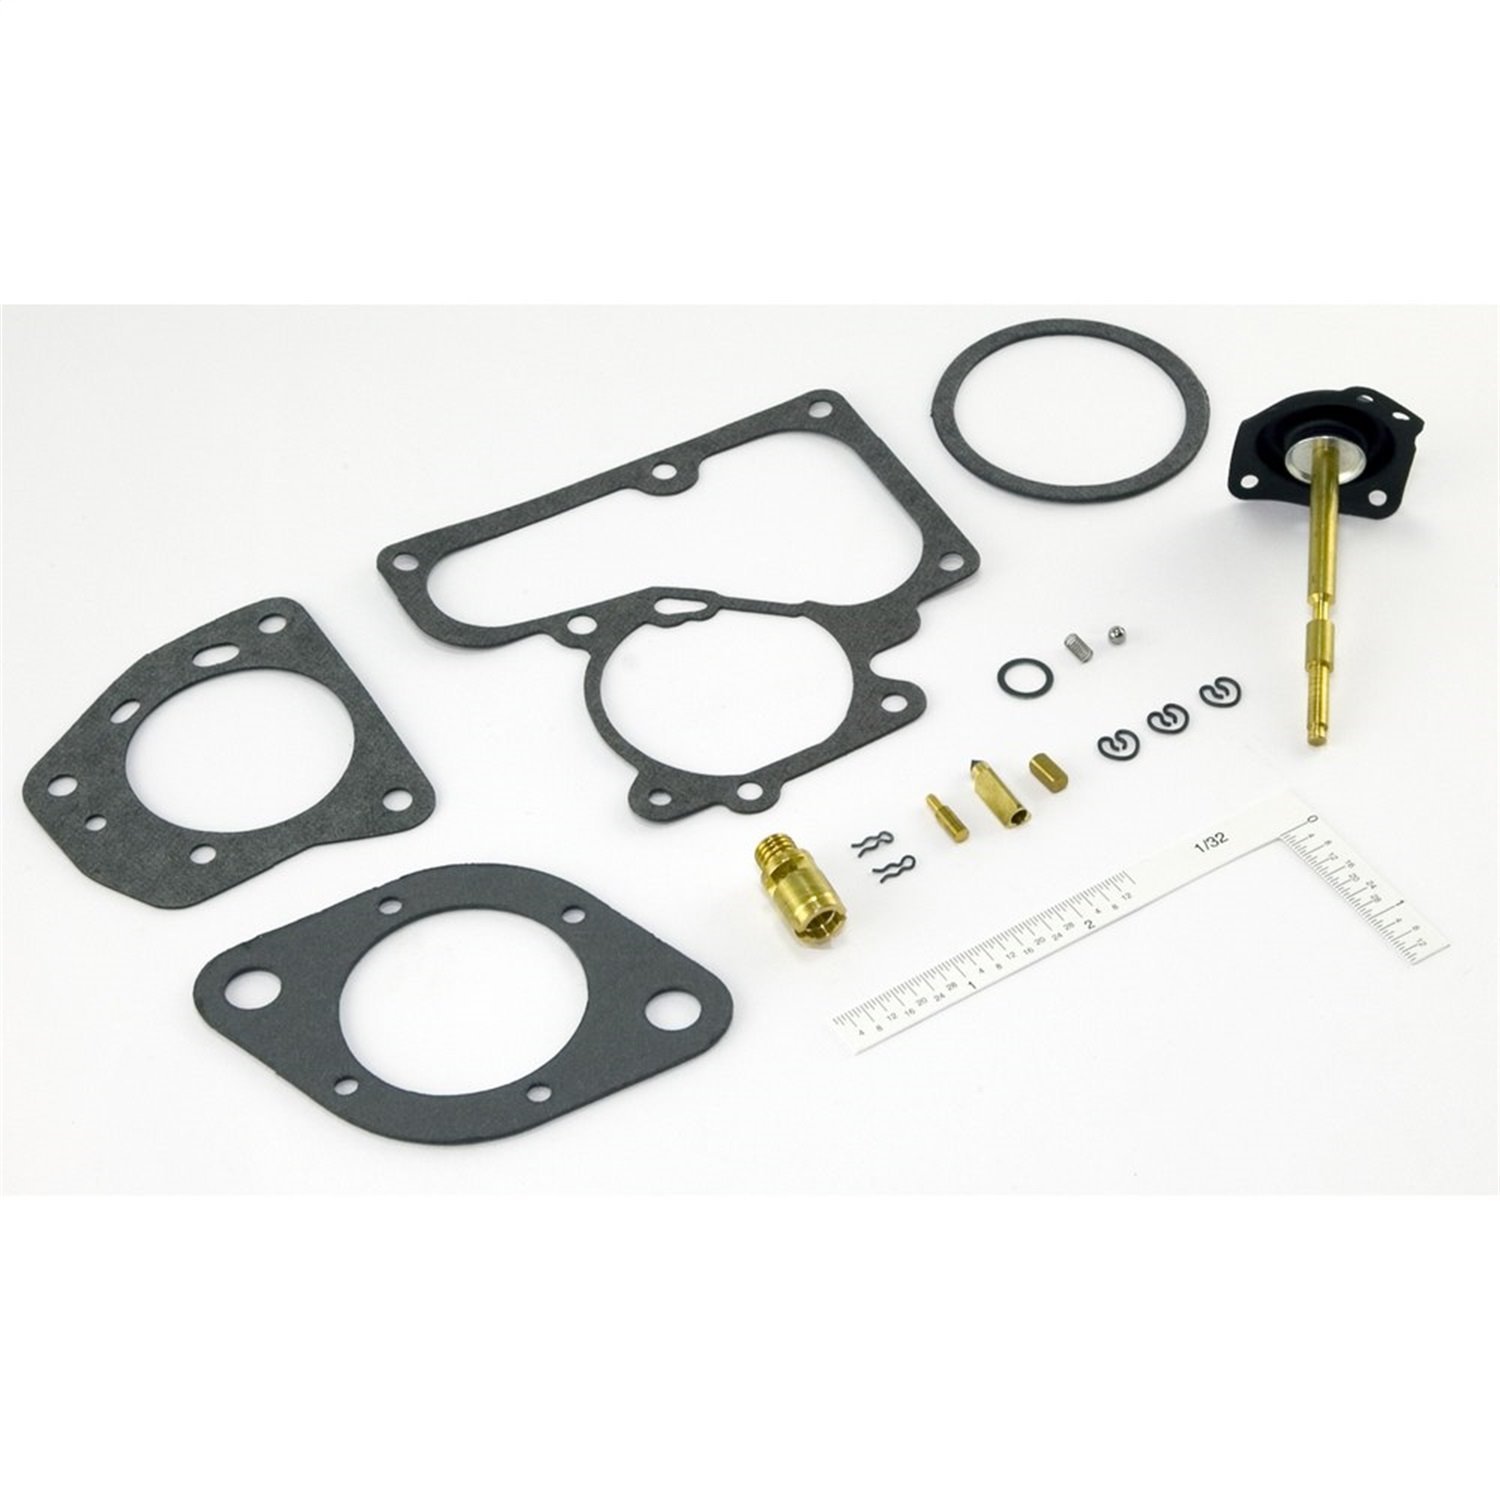 This carburetor rebuild kit services the Carter 1-barrel carburetor used on 232 and 258 cubic inch e